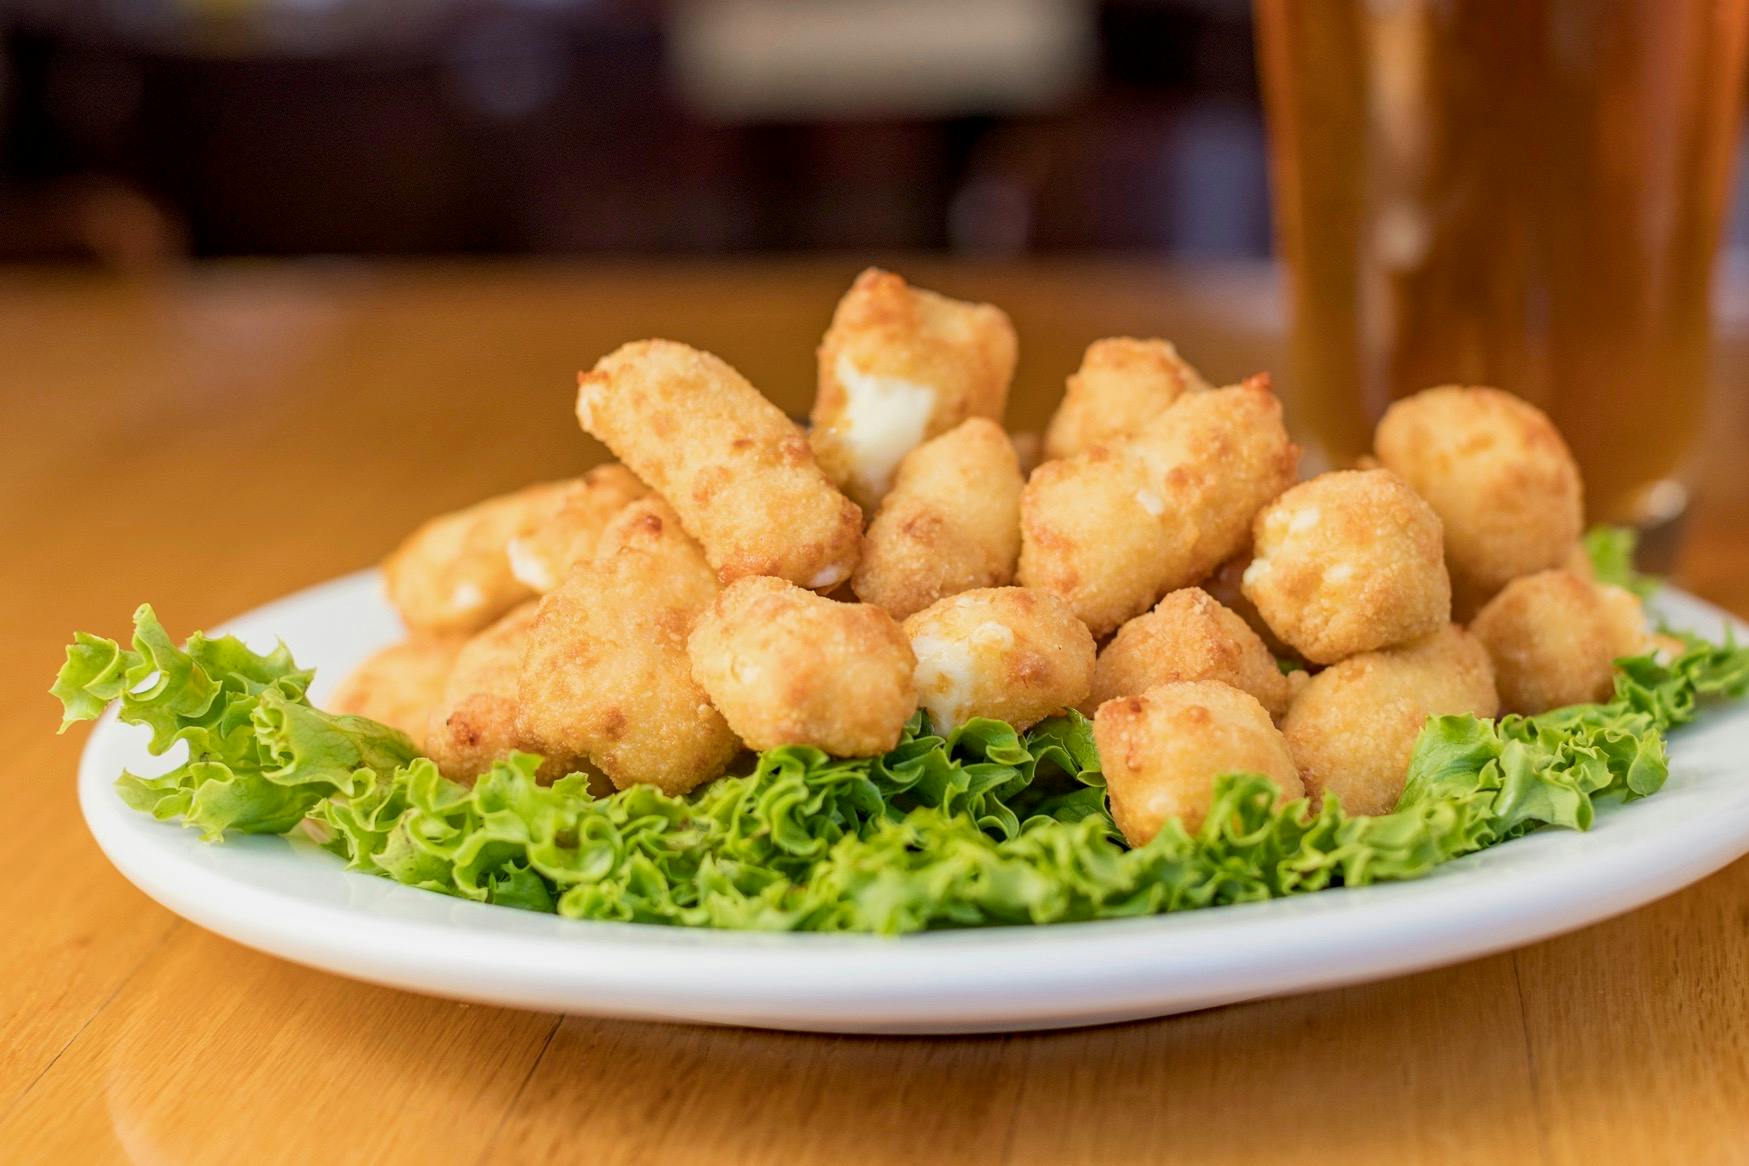 Cheese Curds from Mogie's Pub & Restaurant in Eau Claire, WI